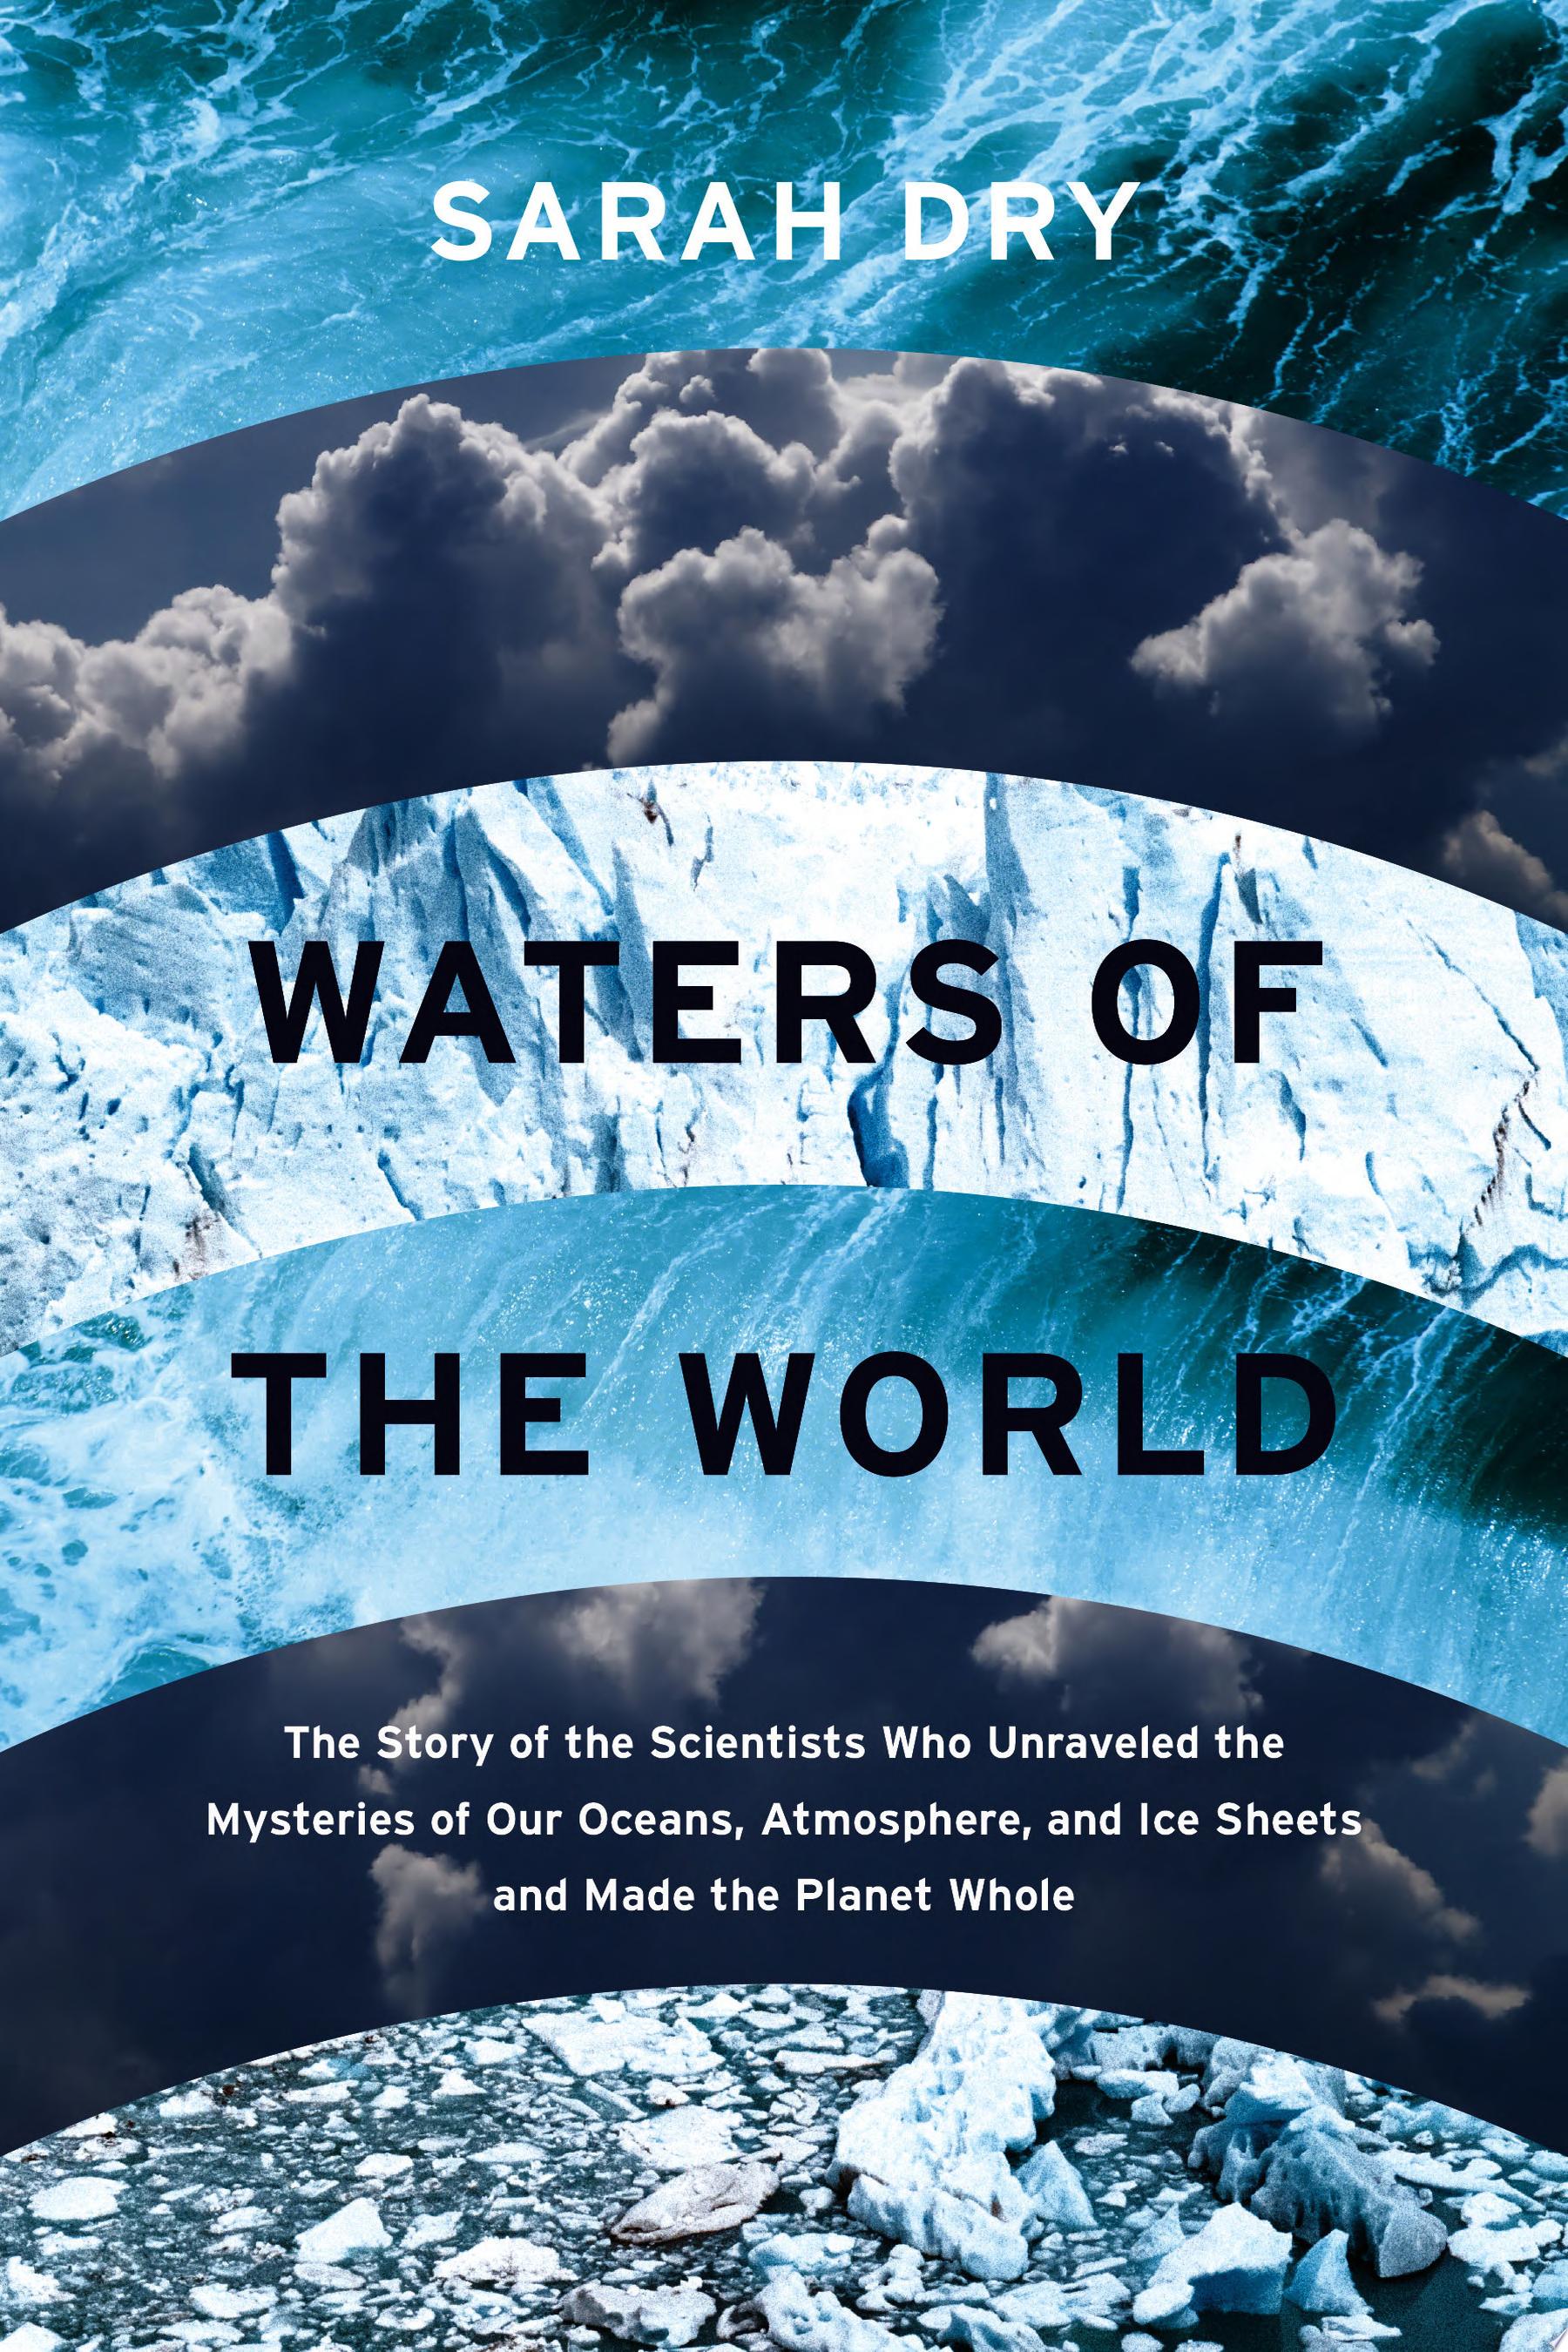 Image for "Waters of the World"